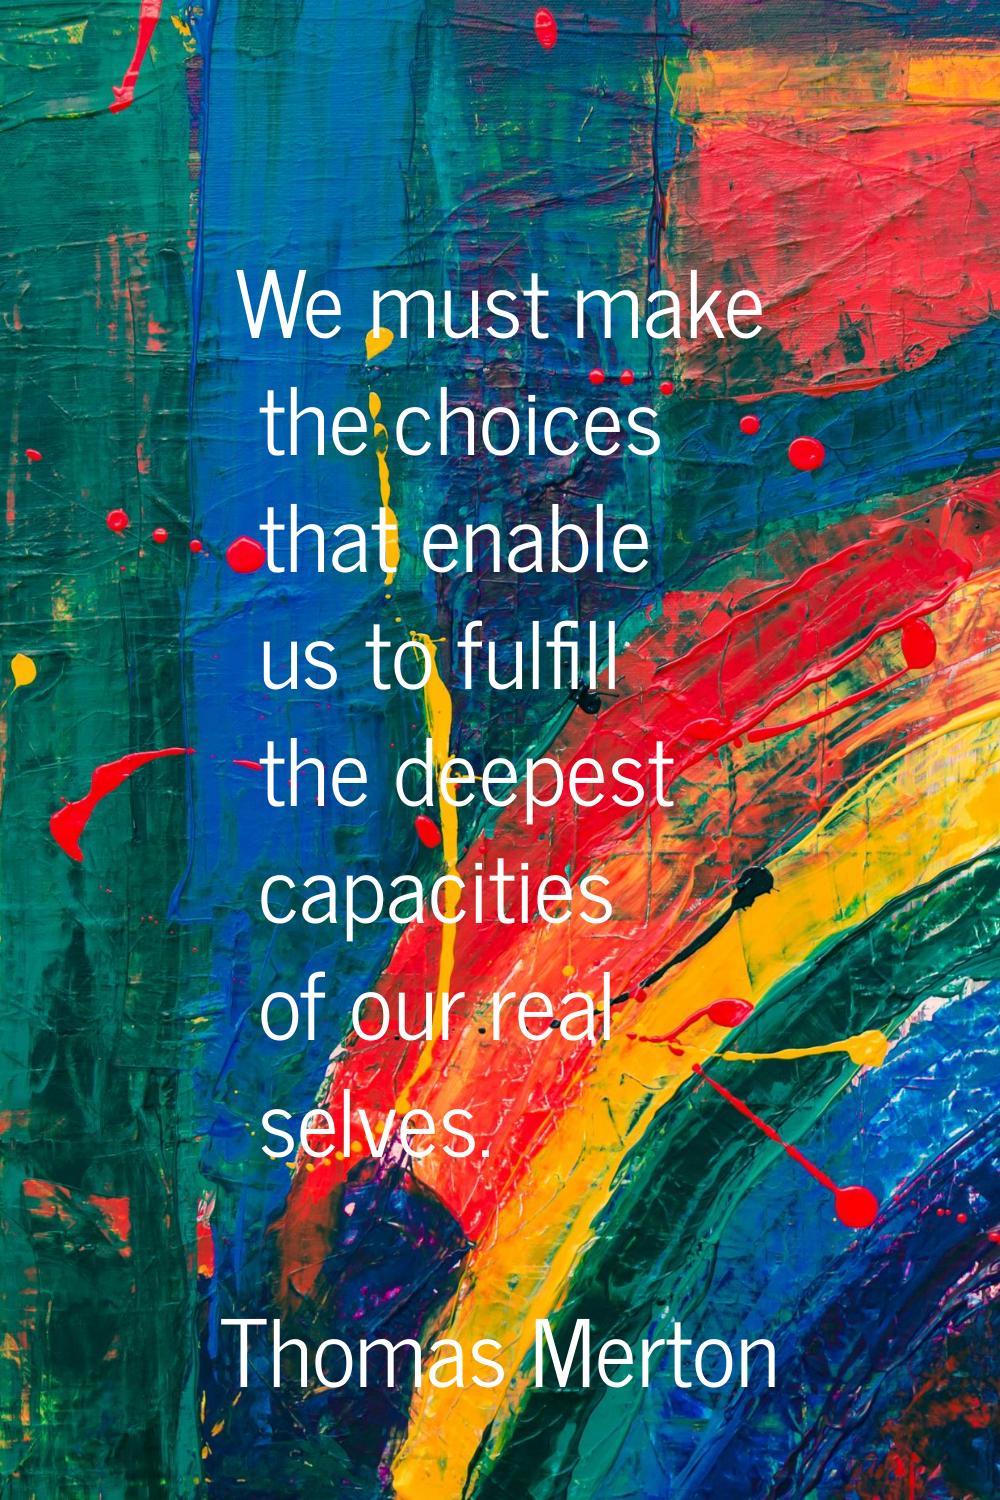 We must make the choices that enable us to fulfill the deepest capacities of our real selves.